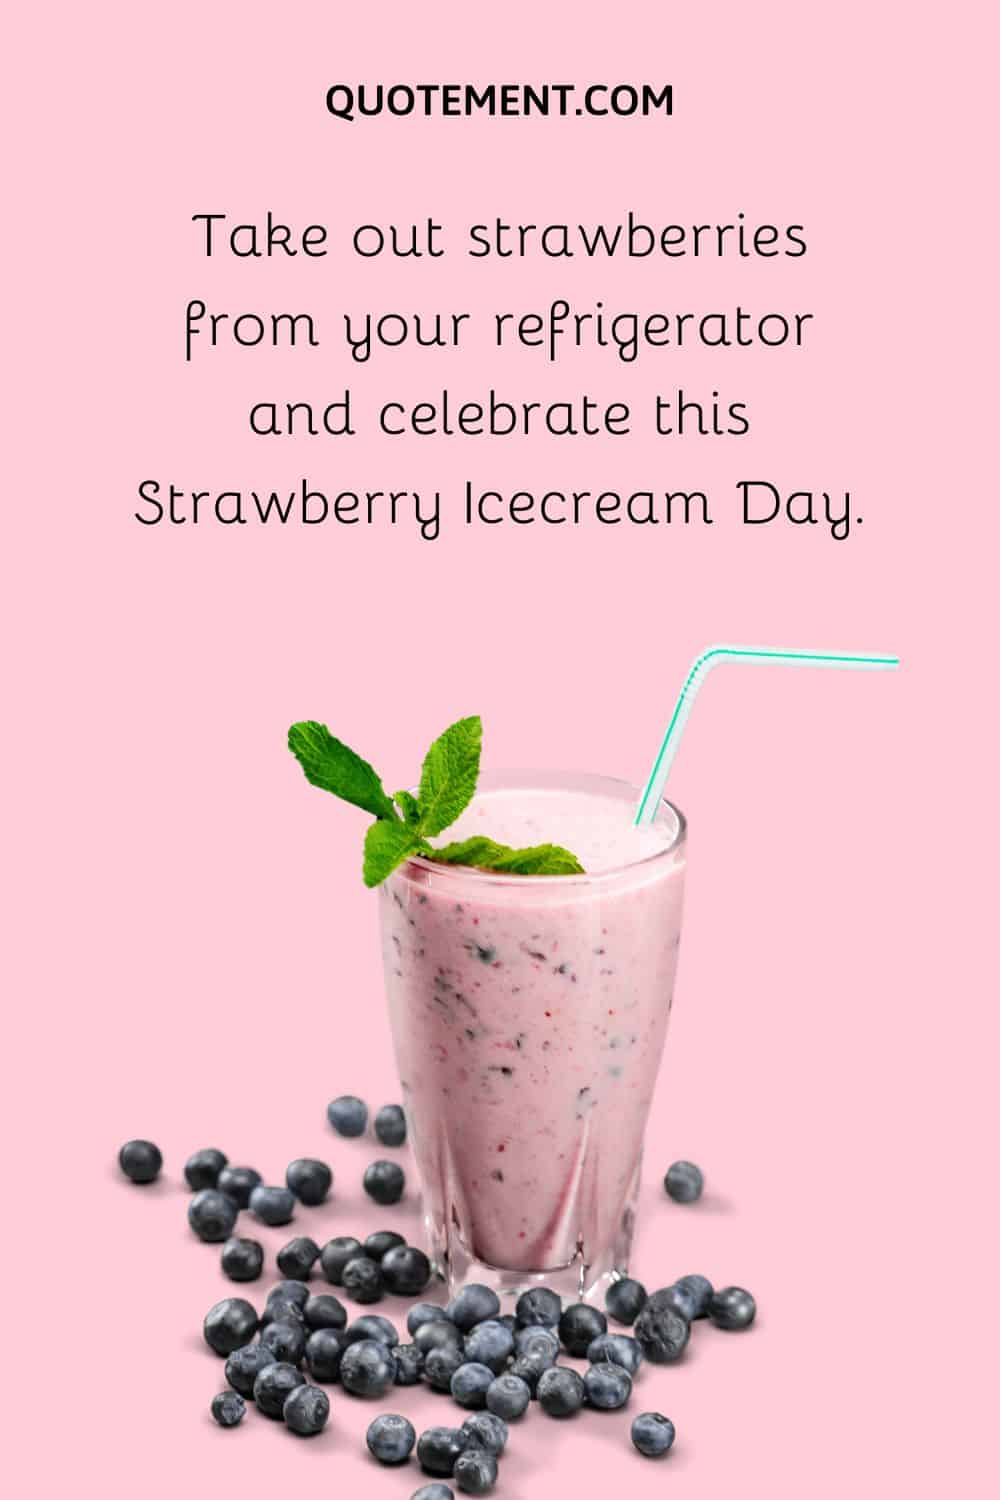 Take out strawberries from your refrigerator and celebrate this Strawberry Icecream Day.